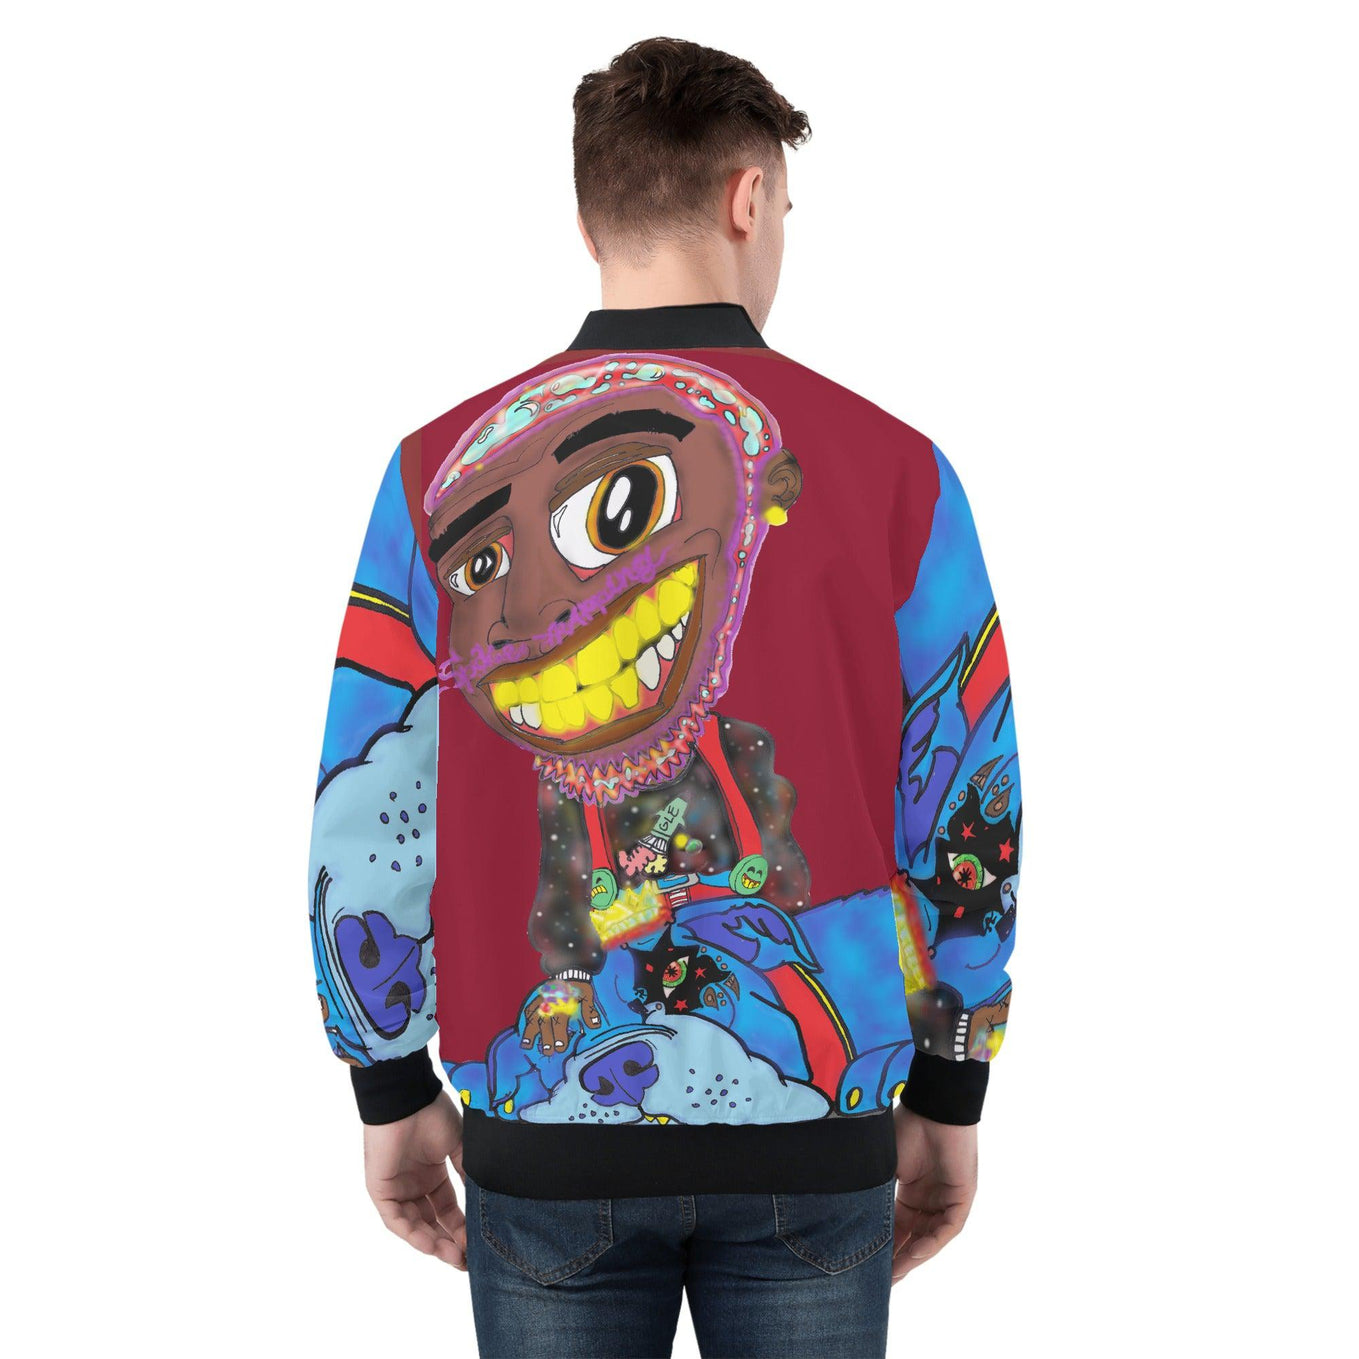 SpaceTrappin Bomber Jacket (Lv.2) - Kanivee Customs